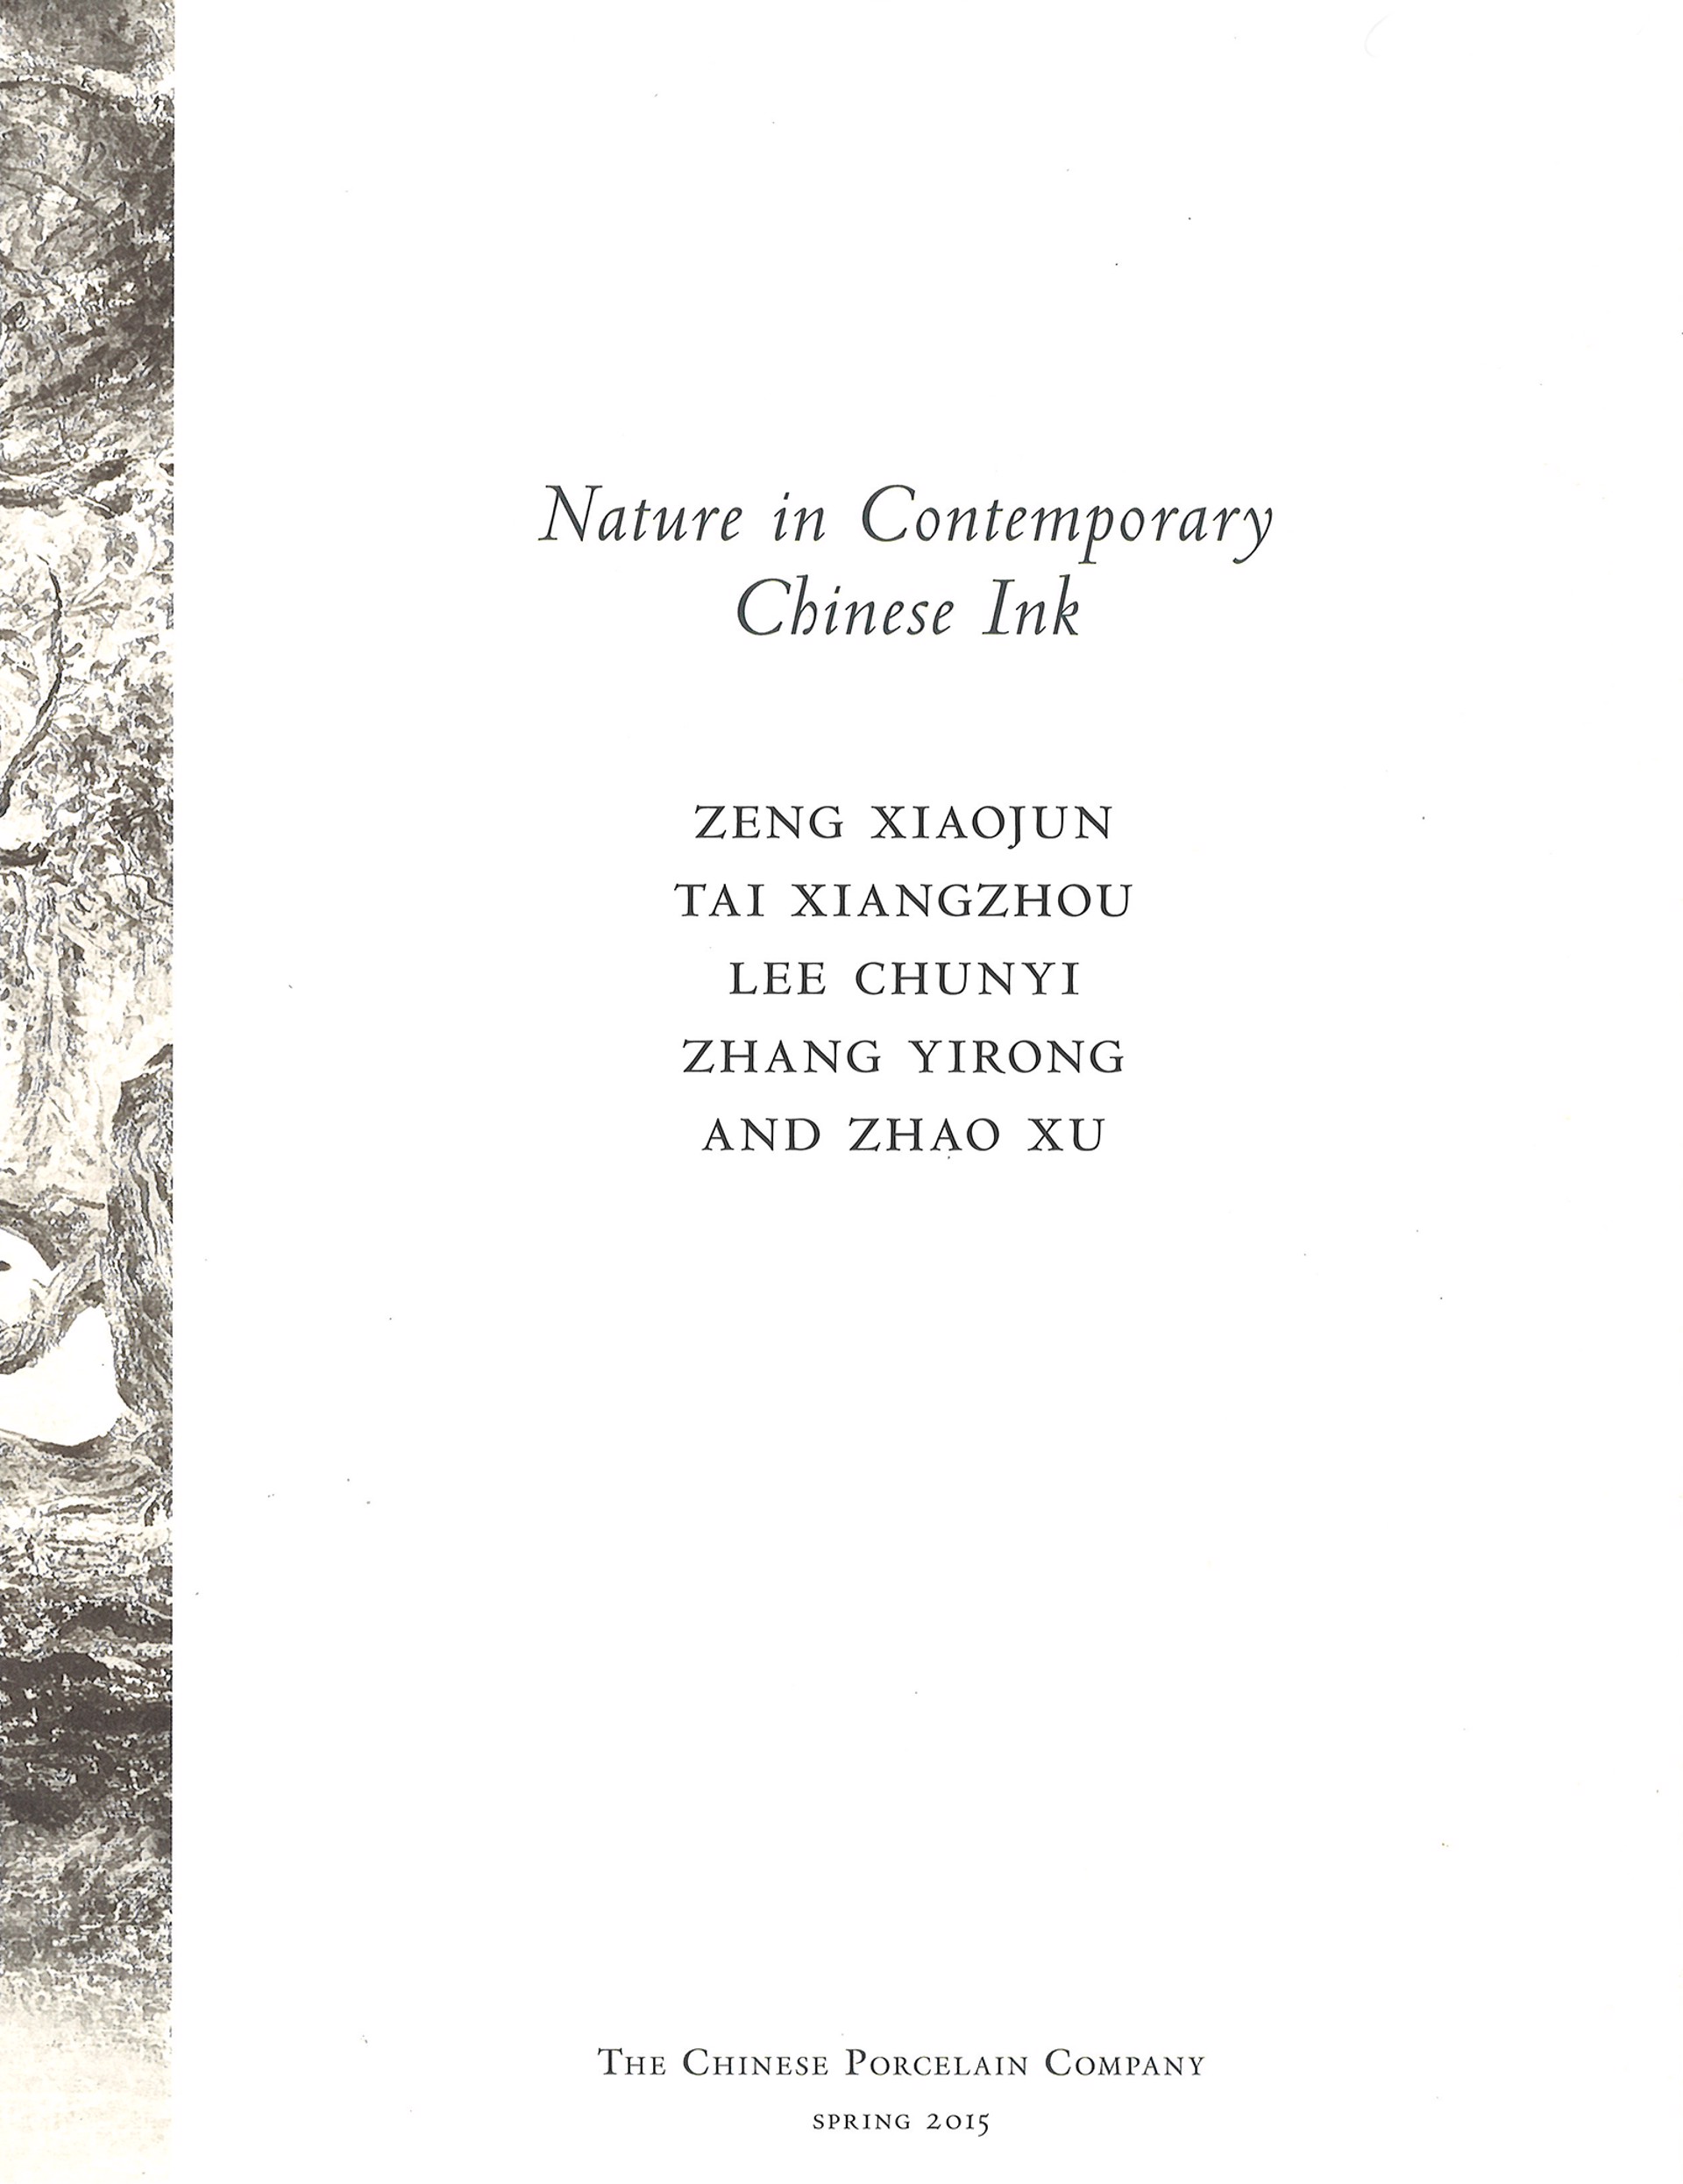 Nature in Contemporary Chinese Ink by Brochure 19